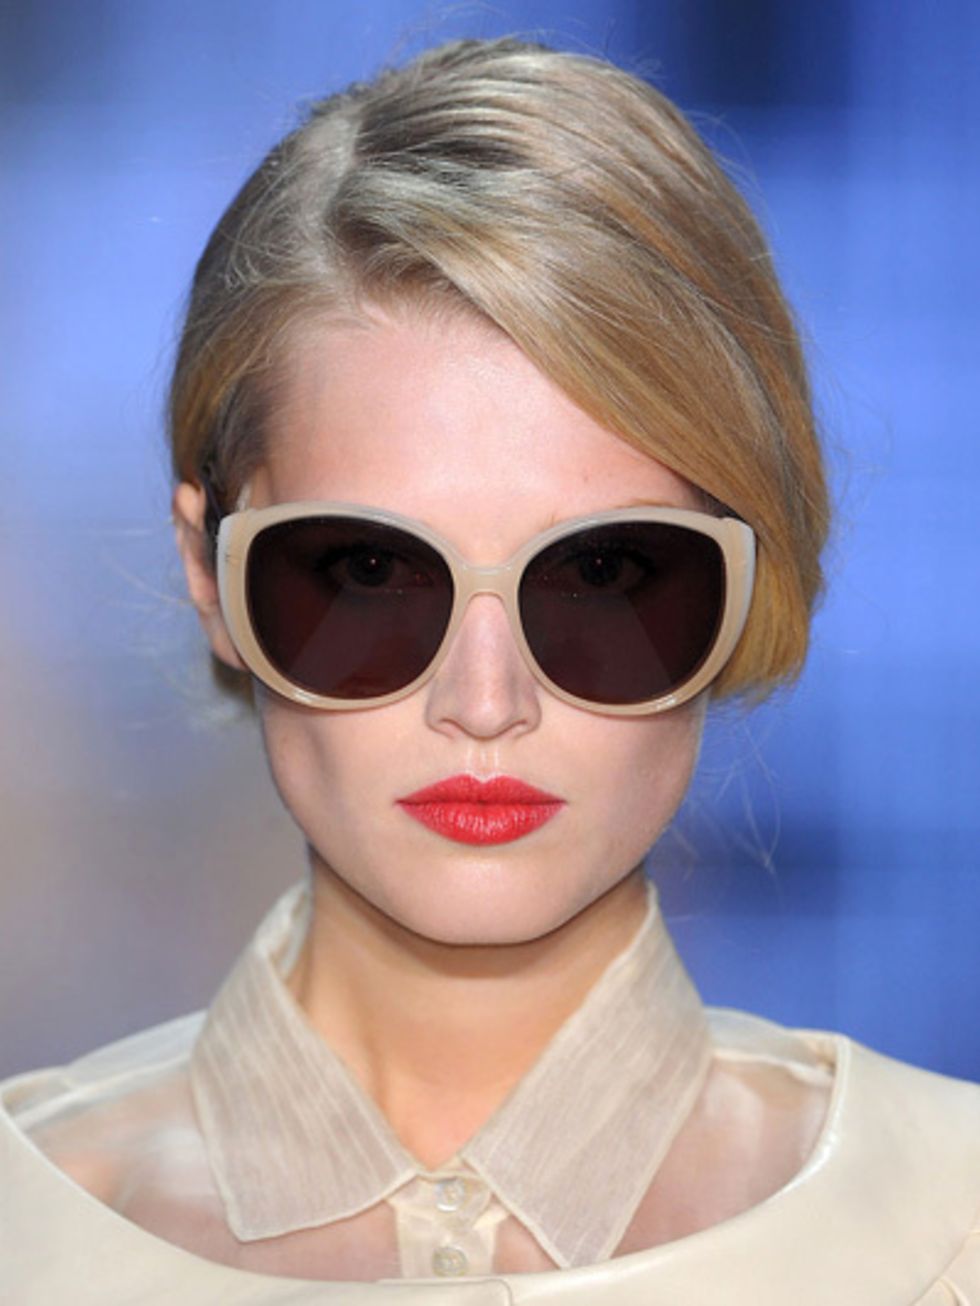 Eyewear, Glasses, Vision care, Lip, Goggles, Hairstyle, Chin, Forehead, Sunglasses, Collar, 